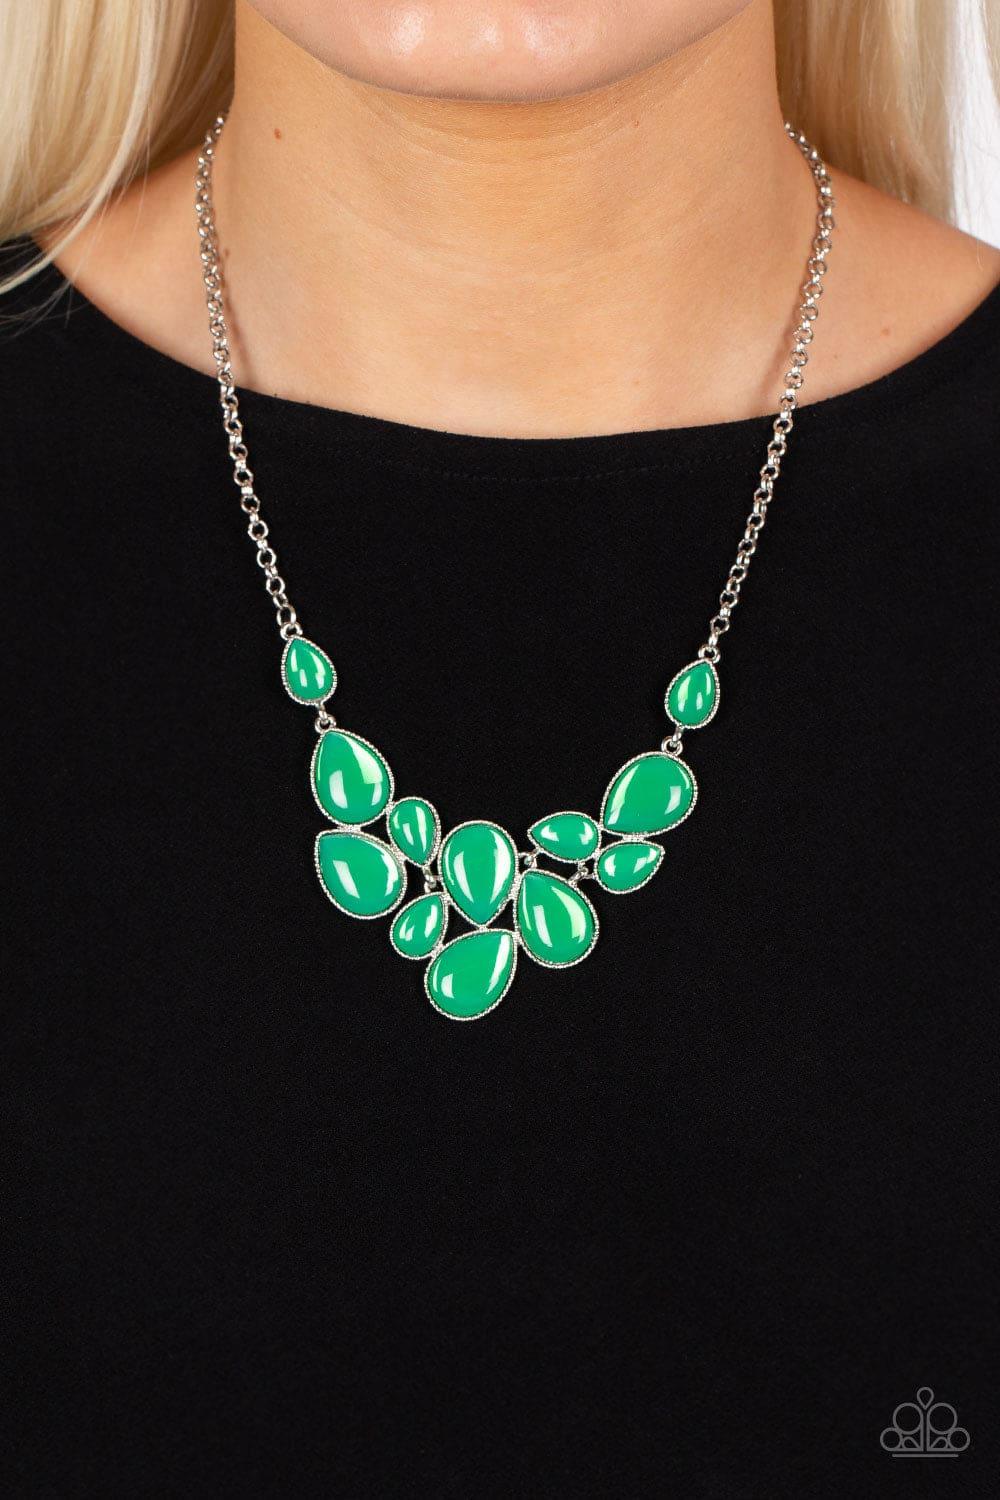 Paparazzi Accessories - Keeps Glowing And Glowing - Green Necklace - Bling by JessieK